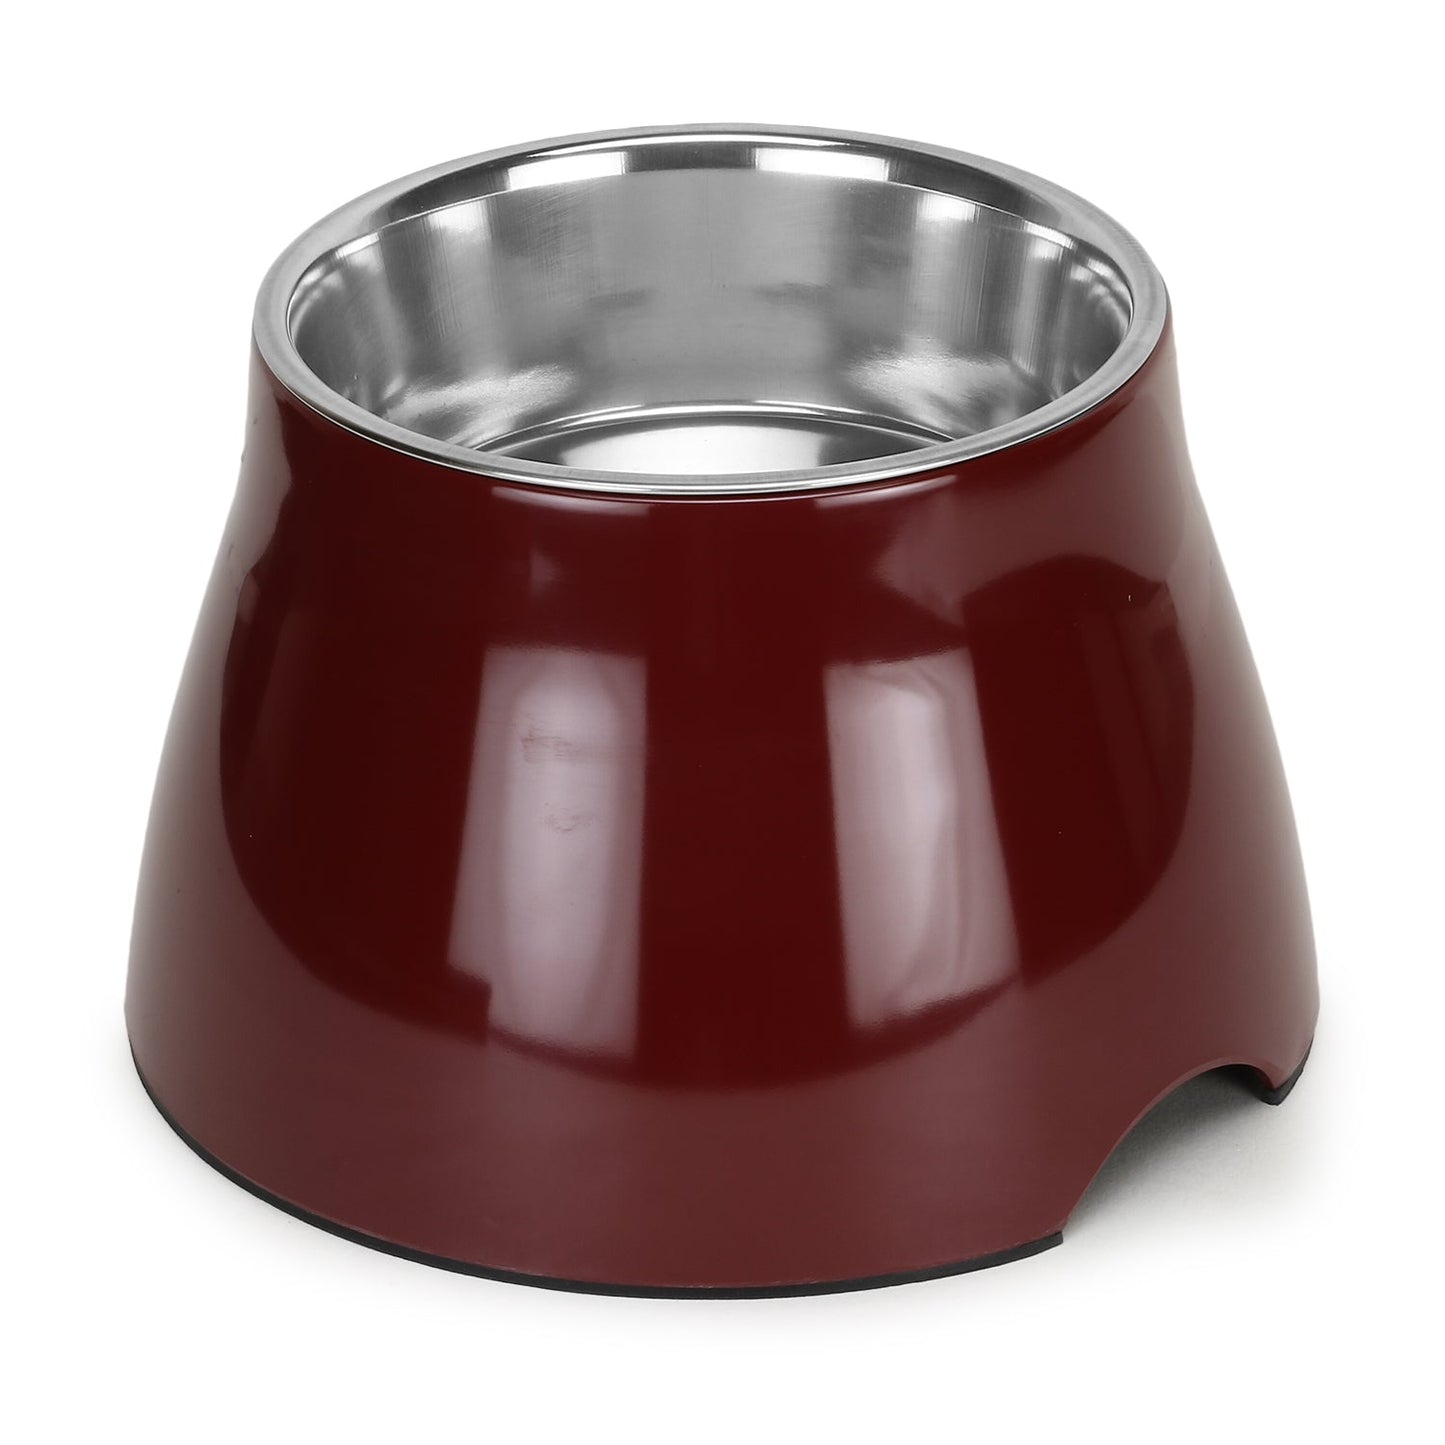 Basil Elevated Melamine and Stainless Steel Pet Feeding Bowls for Bigger Ears Dogs (Wine)